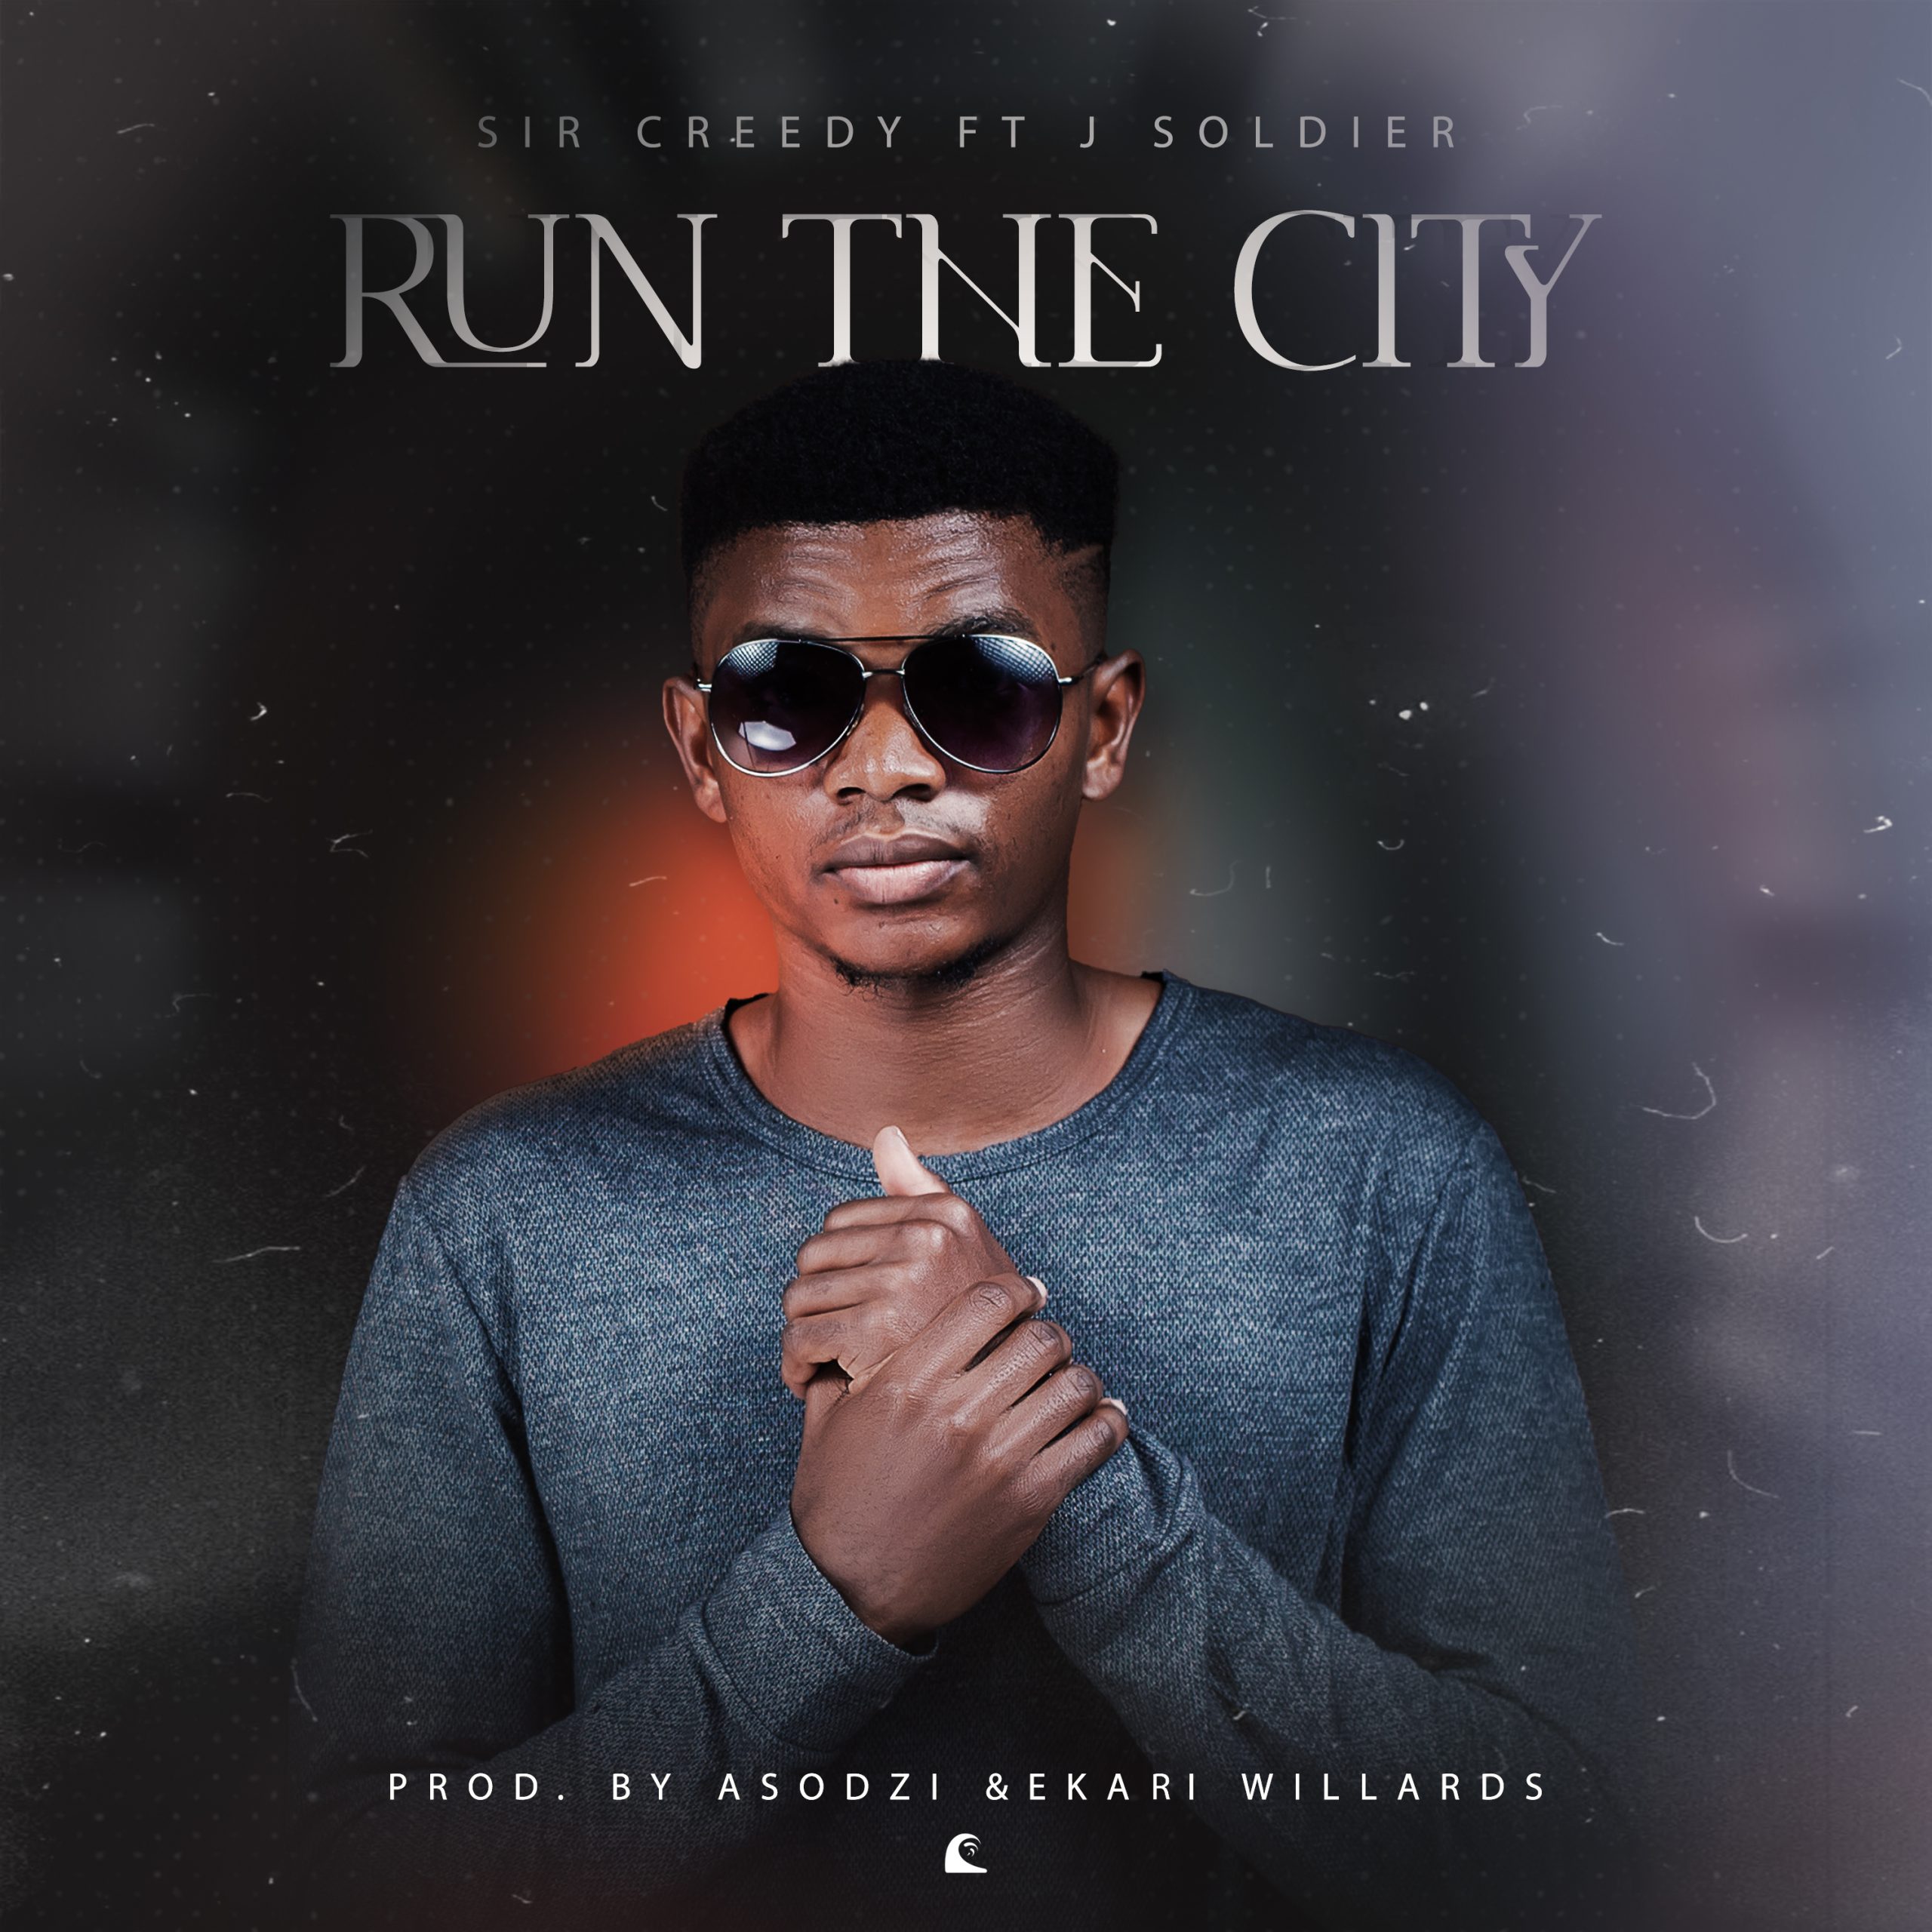 Sir Creedy – Run The City Feat J Soldier